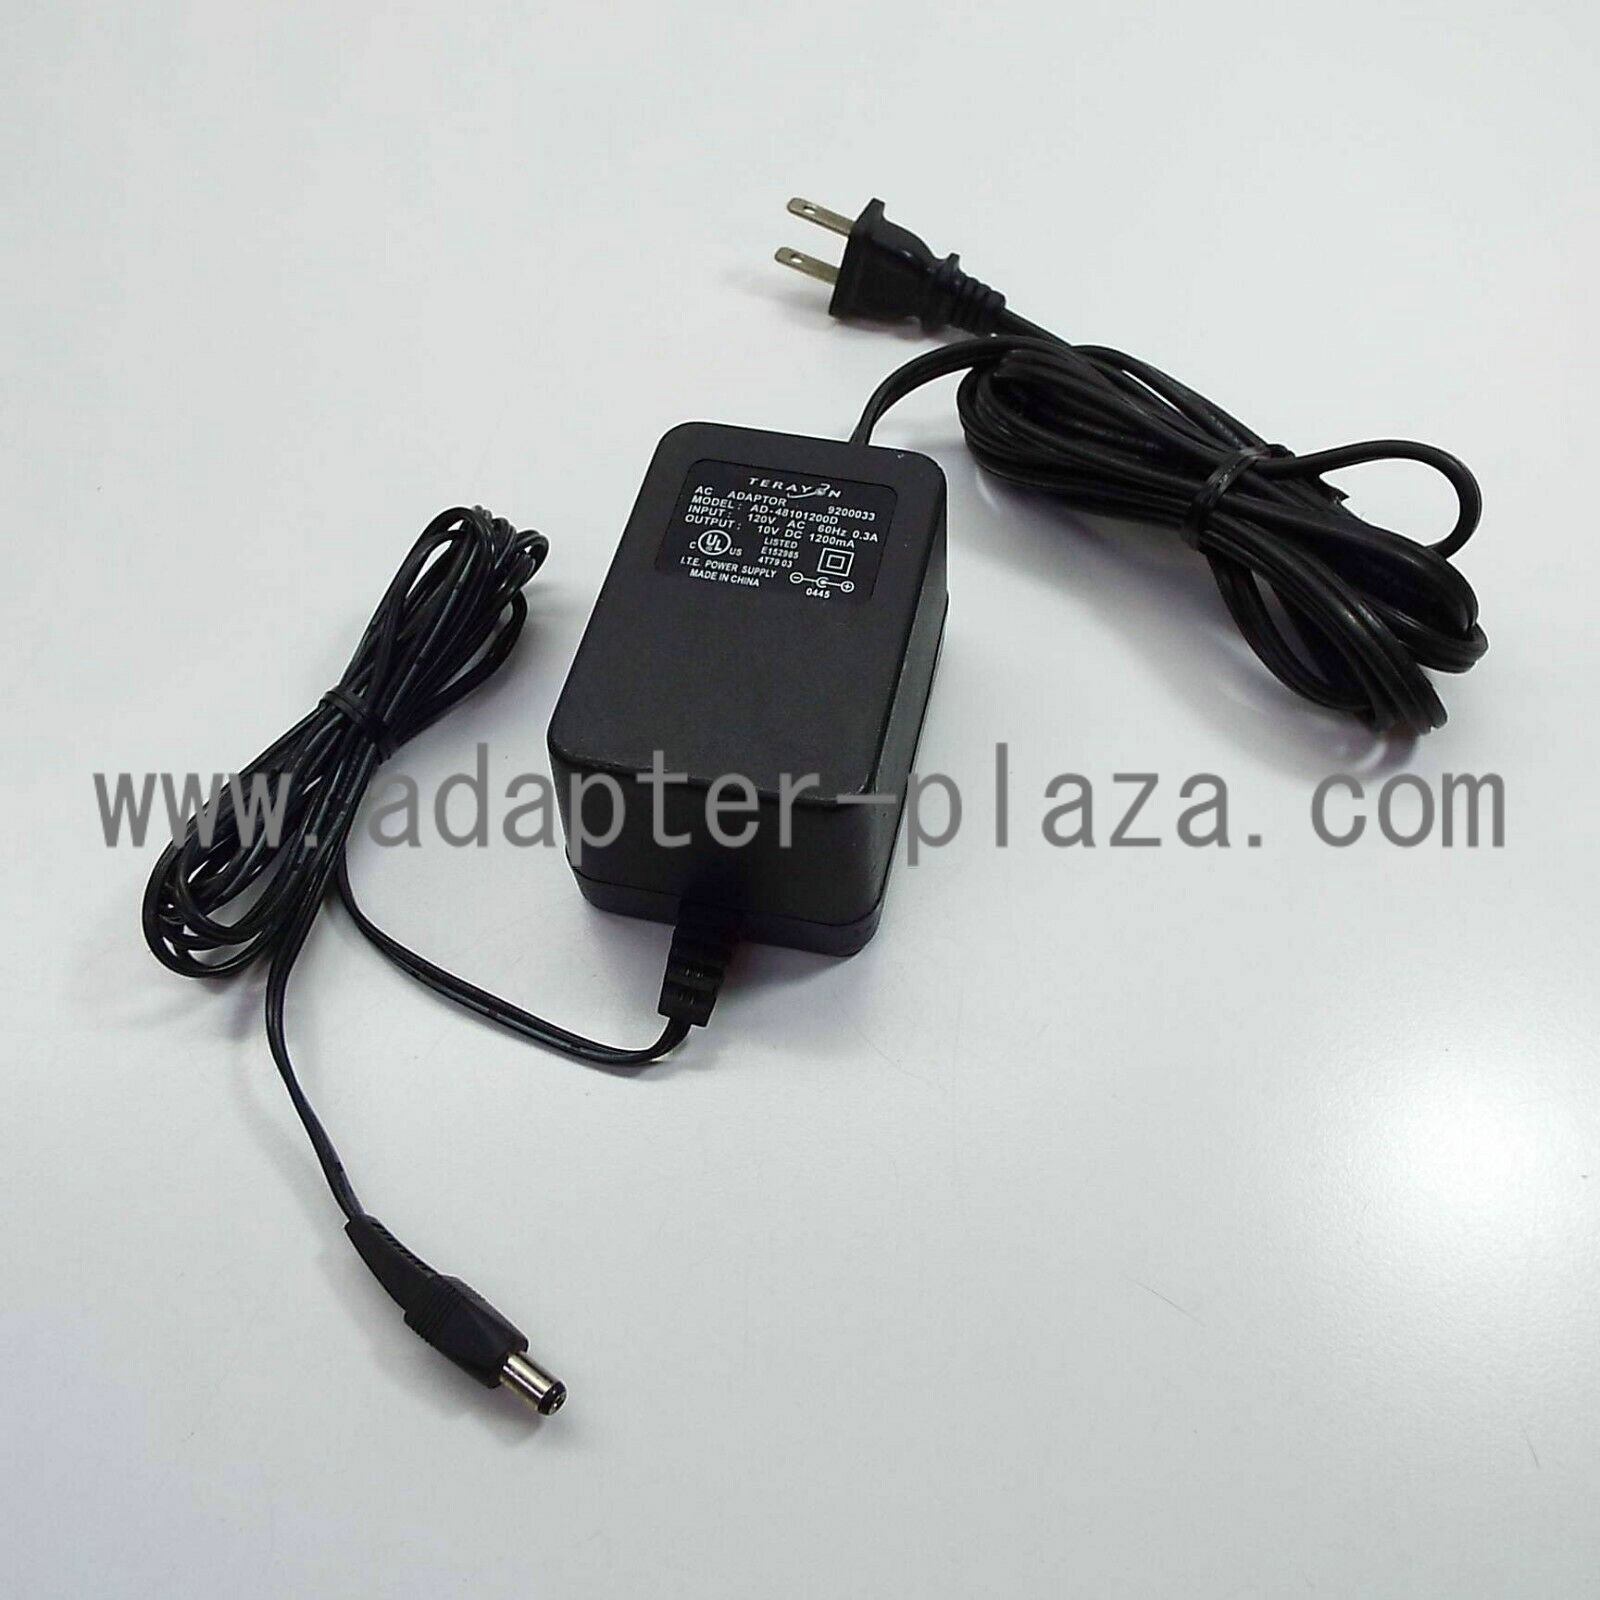 *Brand NEW* Terayon AD-48101200D 10V 1200mA AC DC Adapter POWER SUPPLY